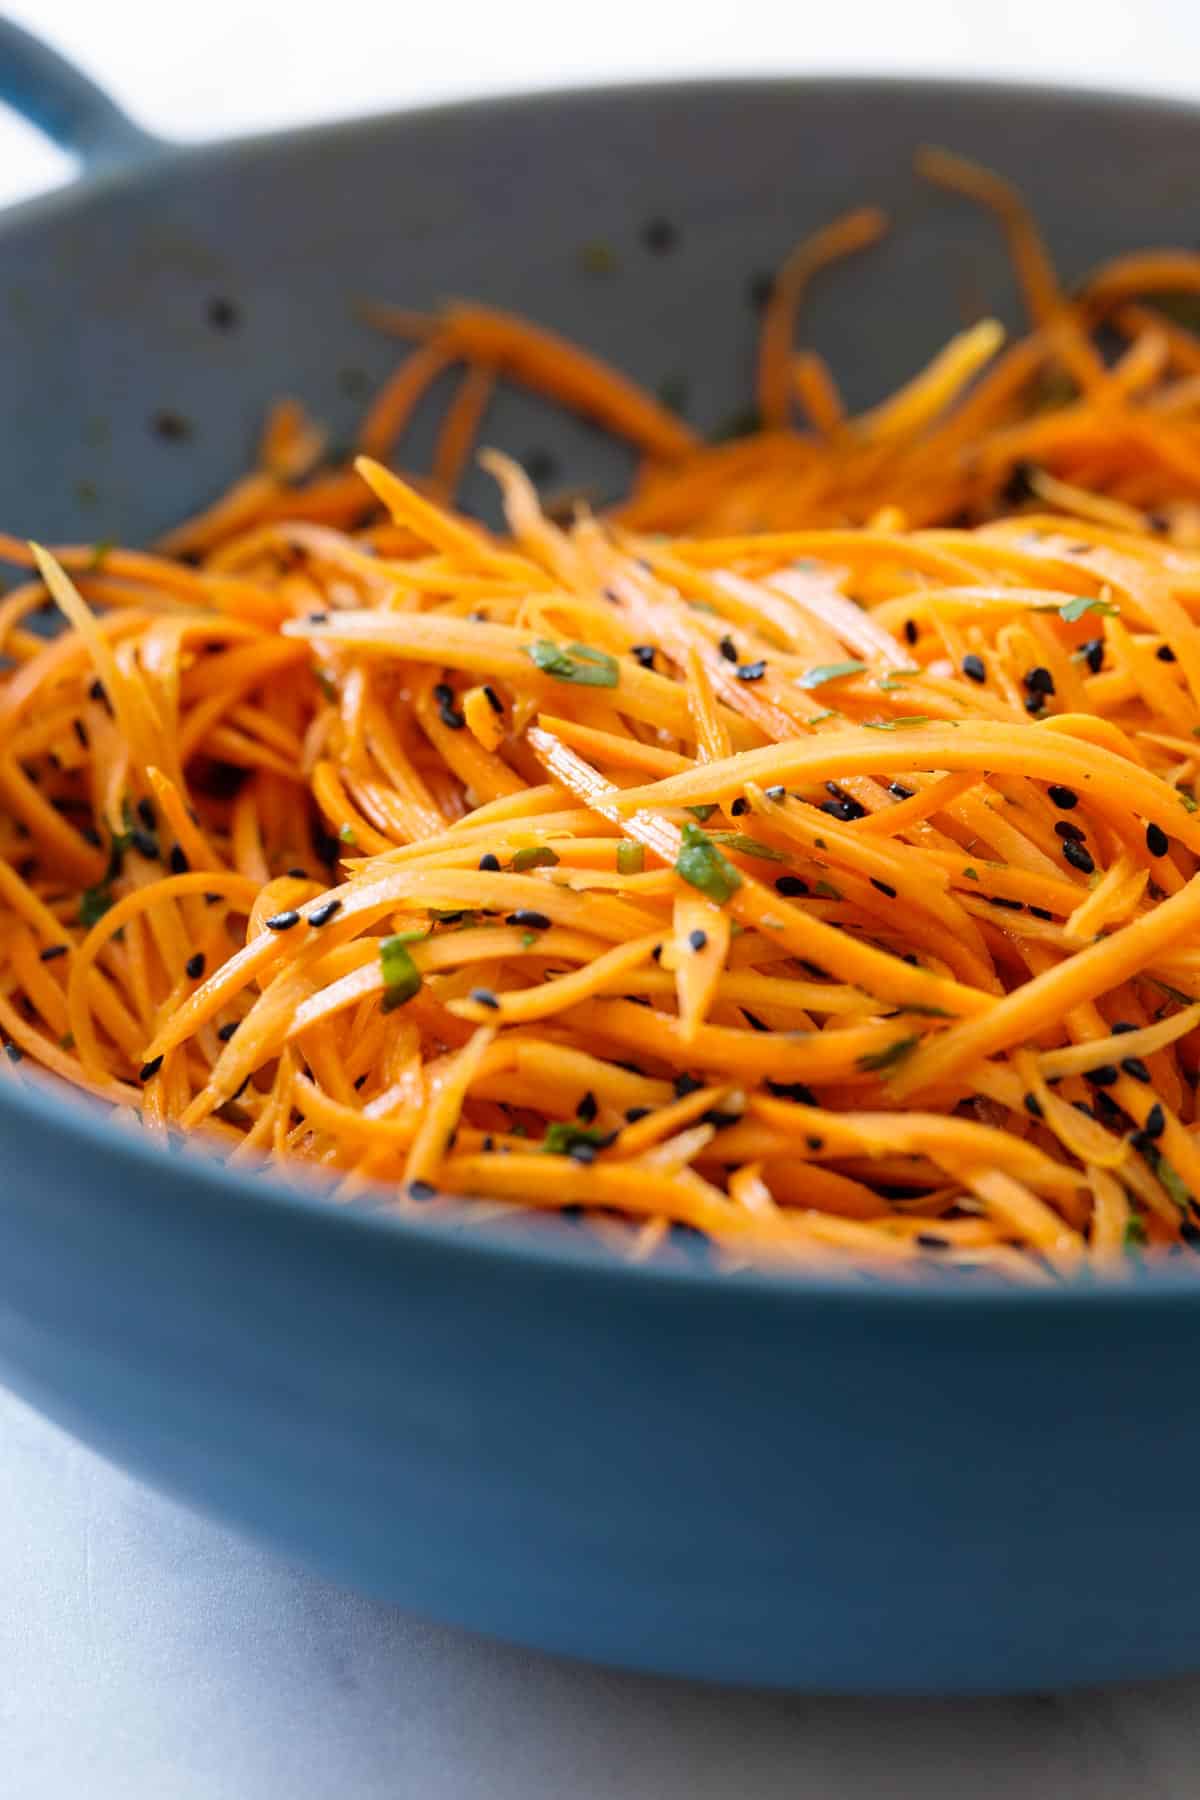 Carrot salad in a blue salad bowl.